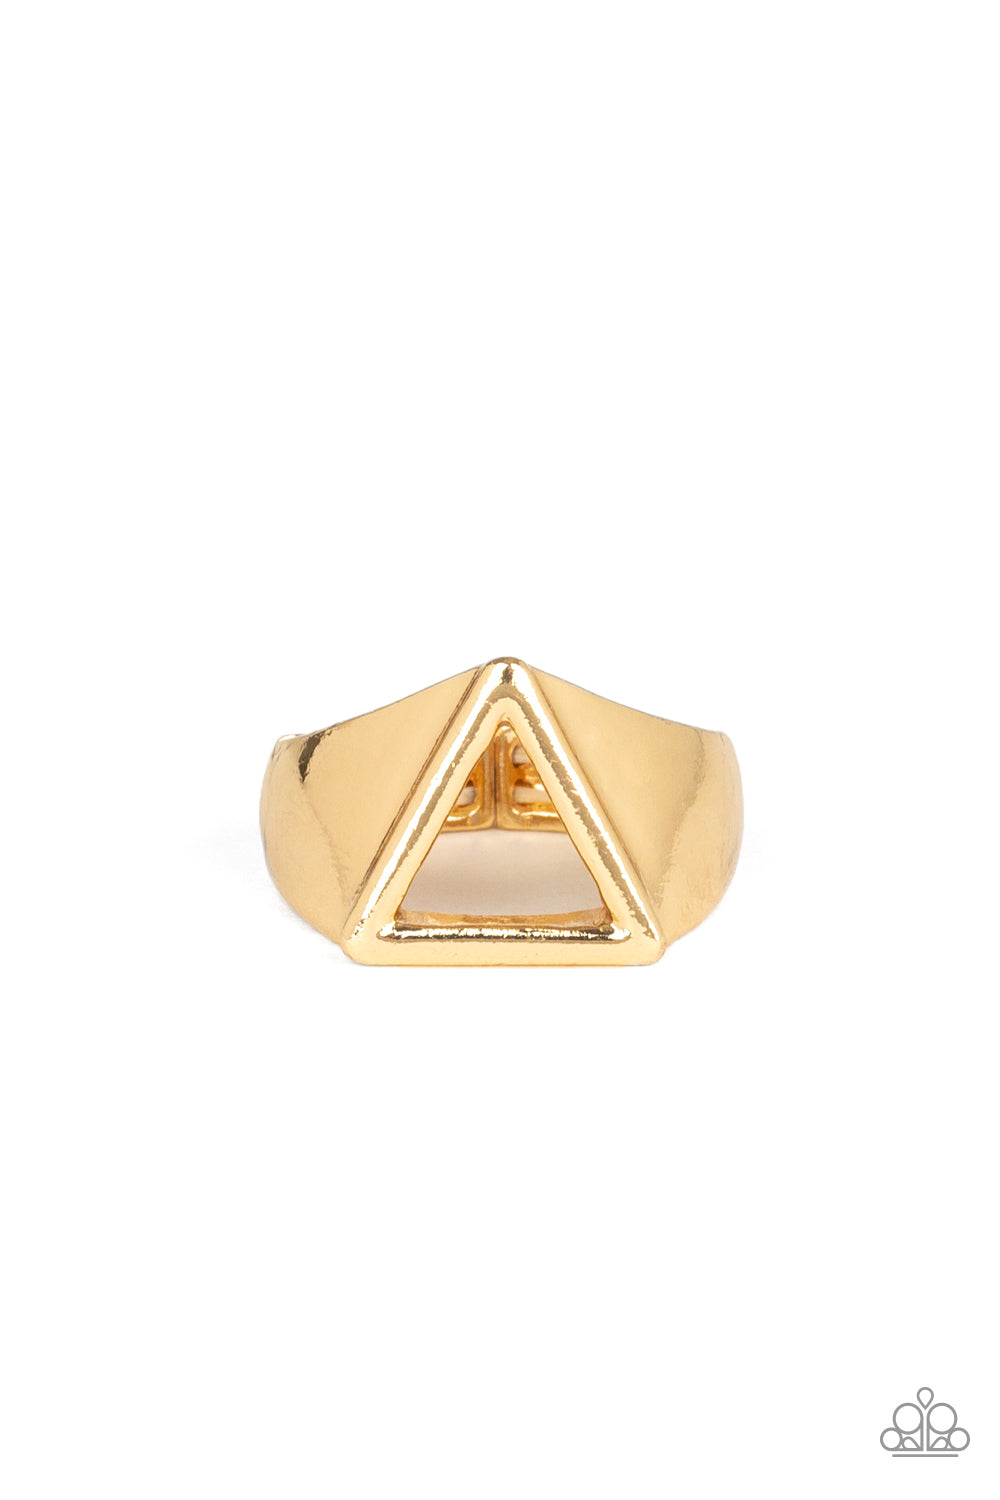 Trident - Gold  An airy triangular frame is set into the center of a thick gold band for a casual look. Features a dainty stretchy band for a flexible fit.  Sold as one individual ring.